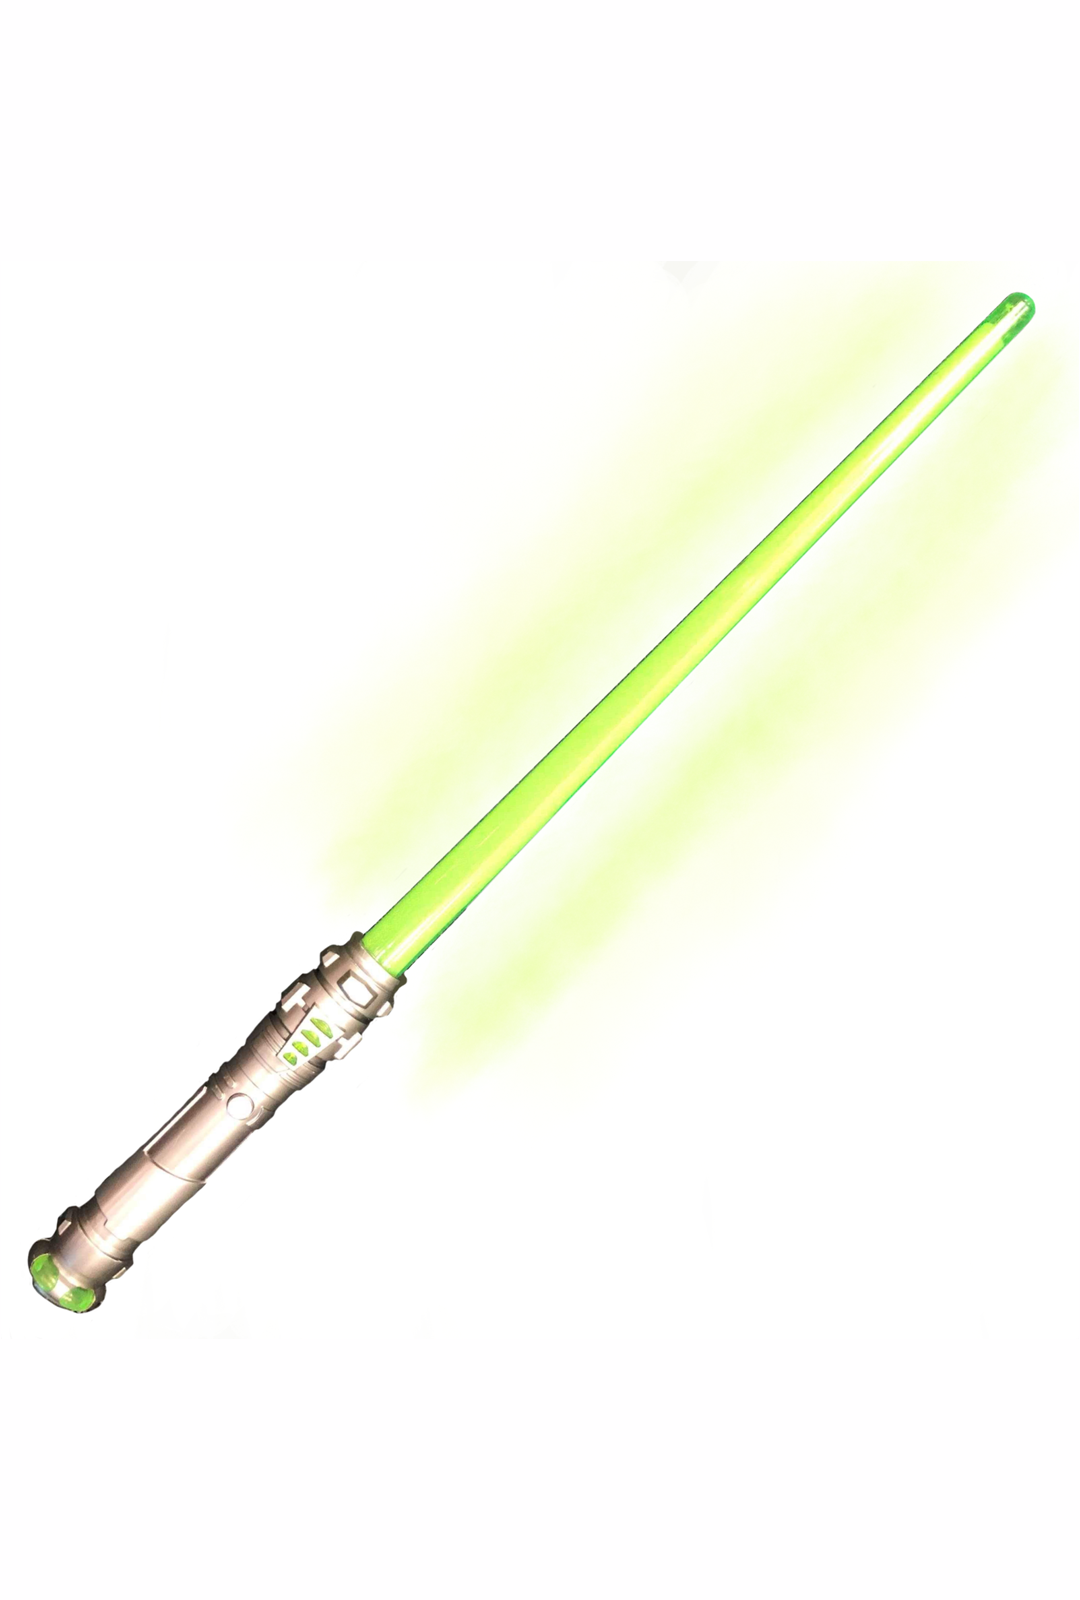 Space Soldier Green Lightsaber